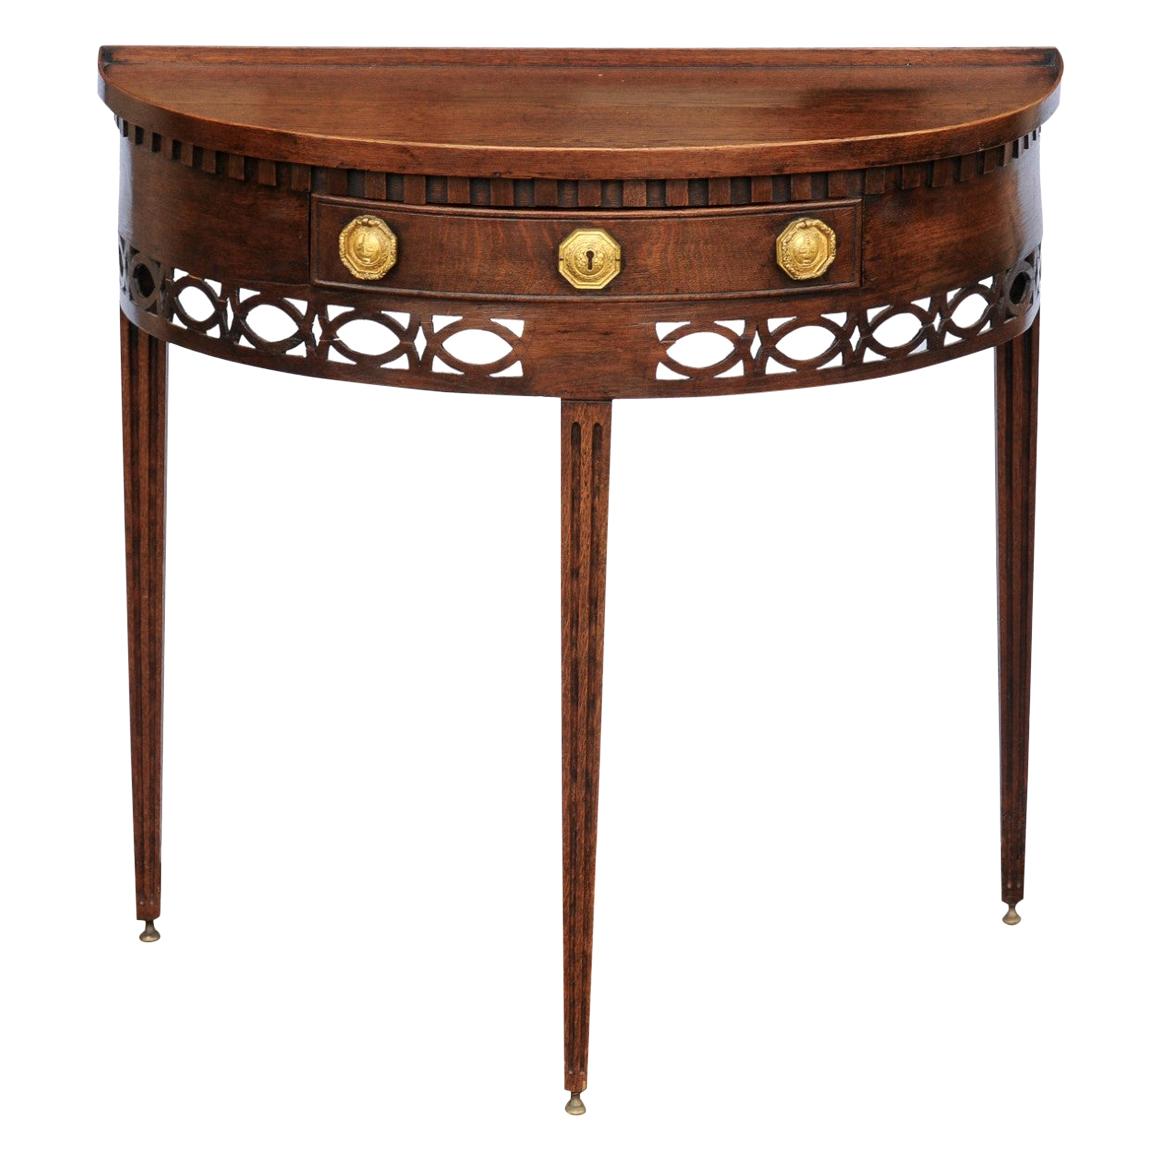 English 1860s Oak Demilune Table with Drawer, Tapered Legs and Pierced Motifs For Sale